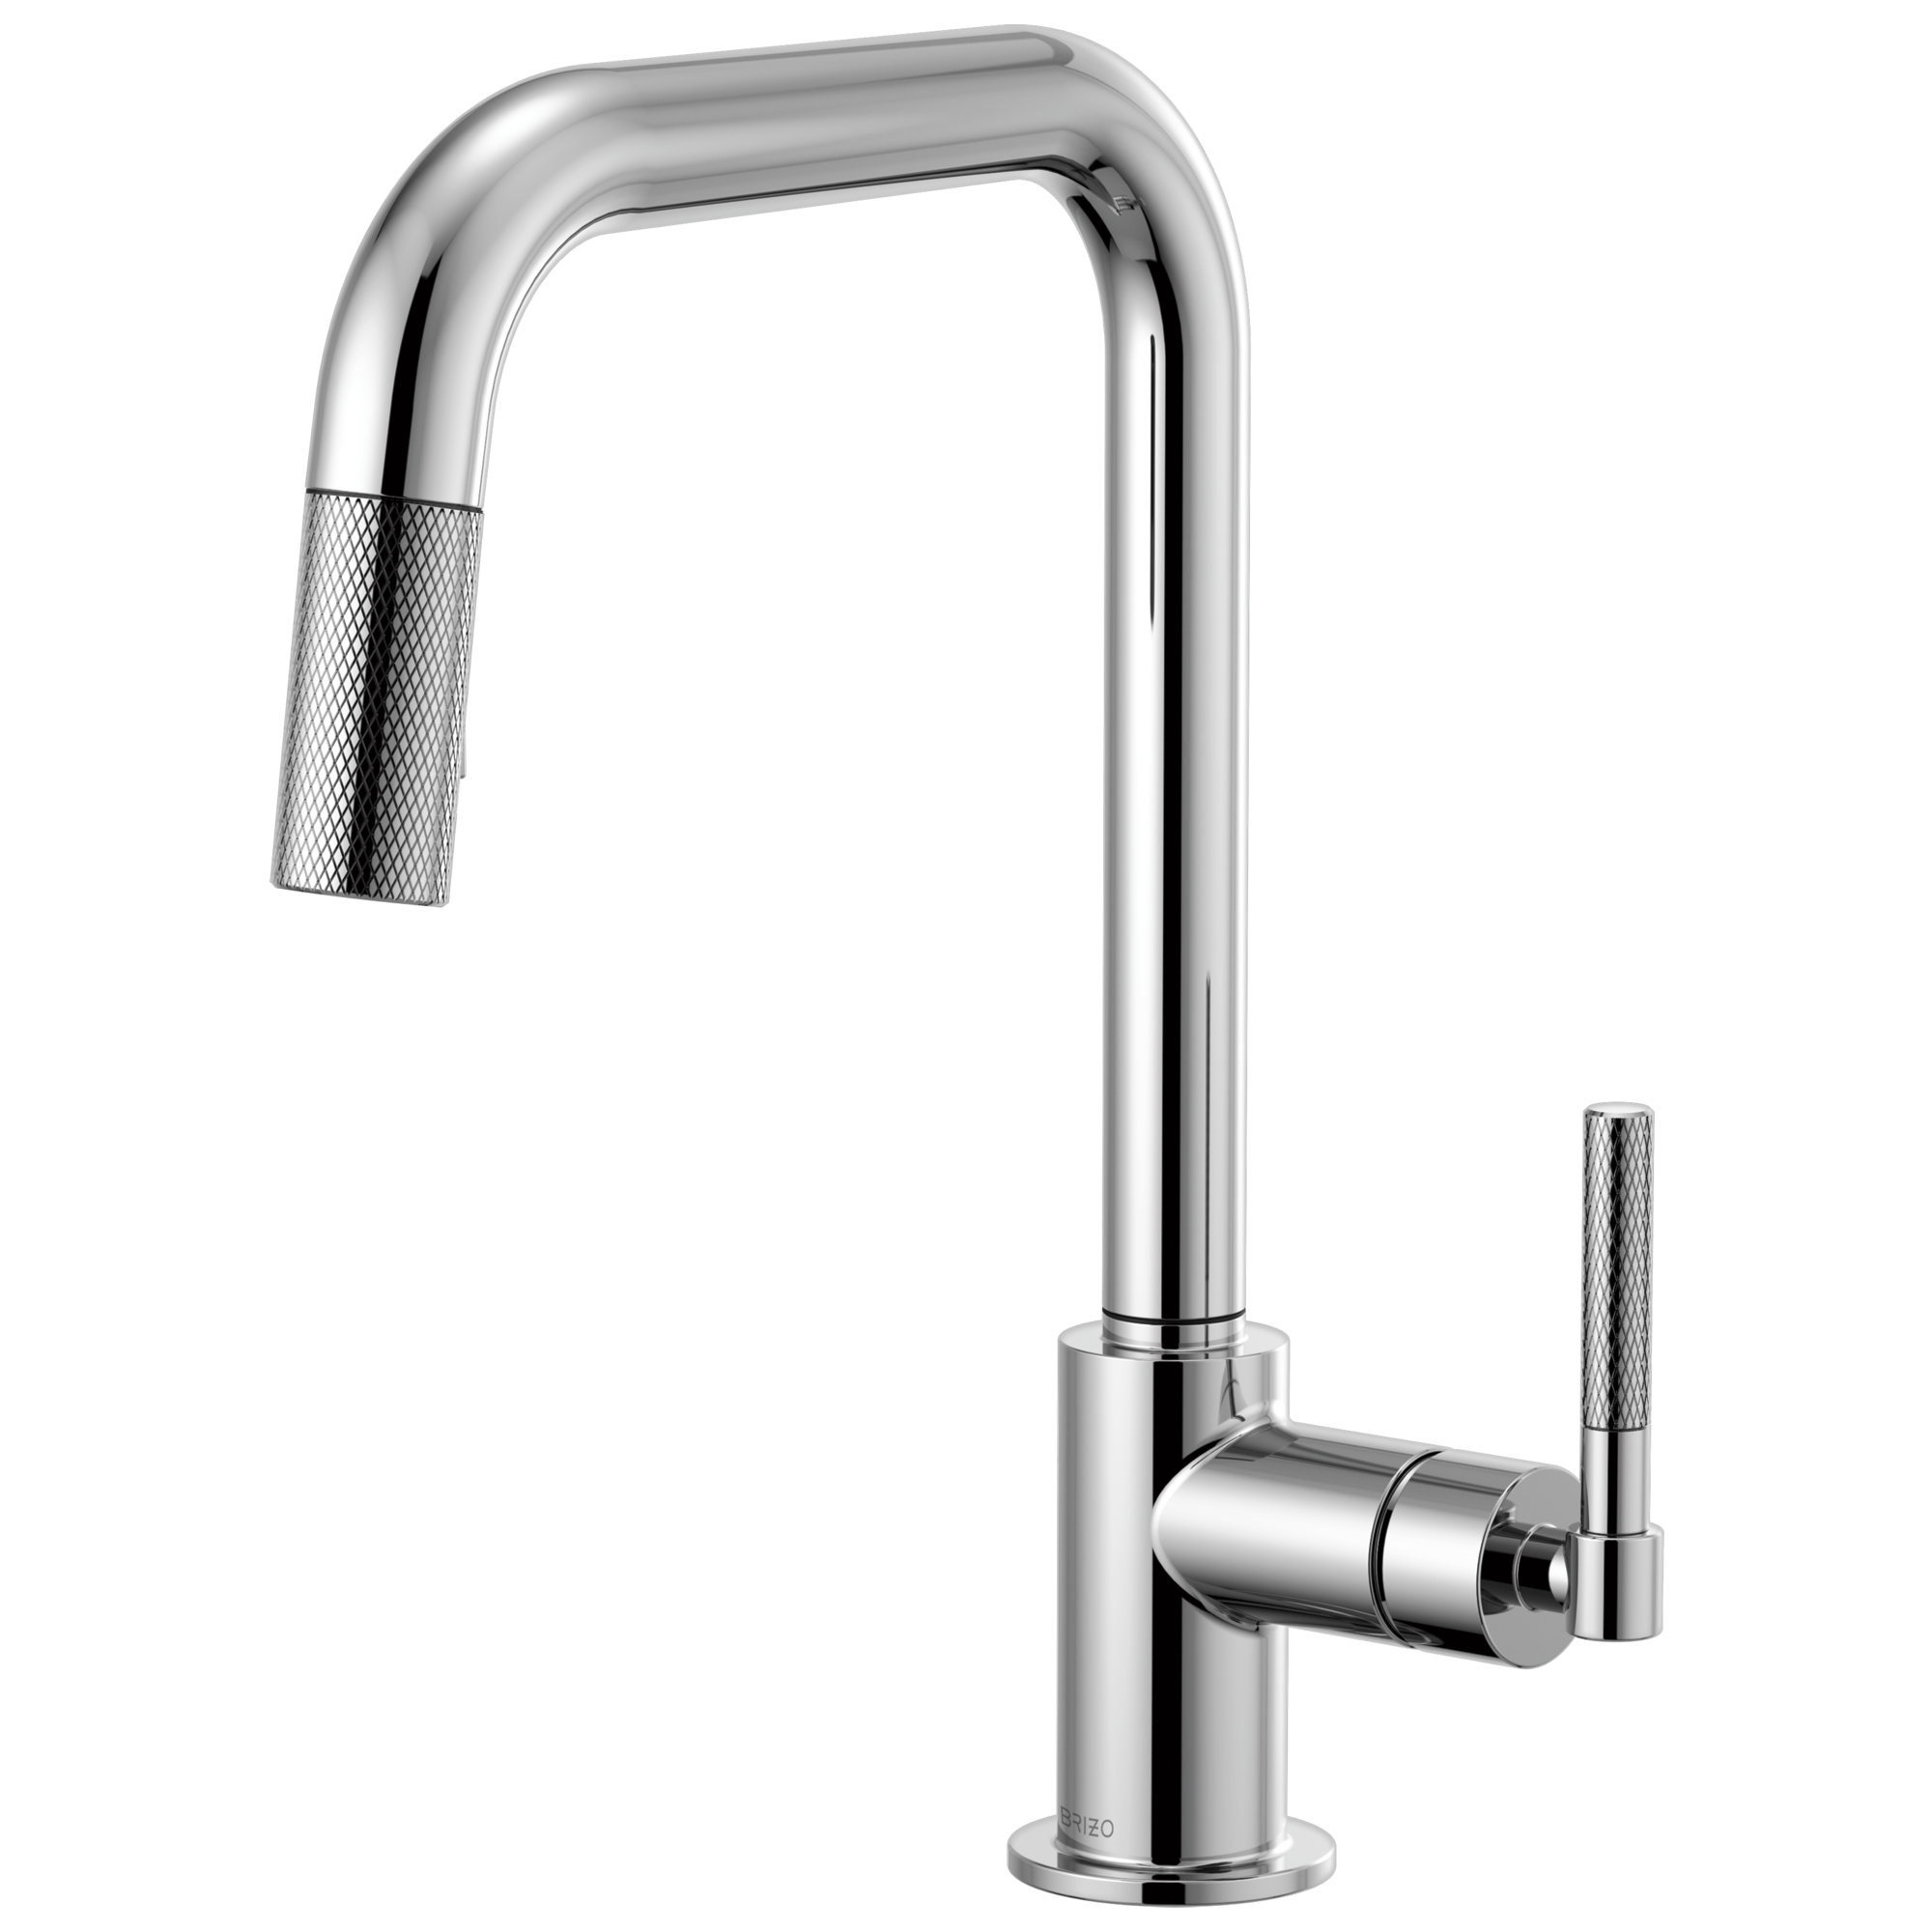 Brizo Litze: Pull-Down Faucet with Square Spout and Knurled Handle